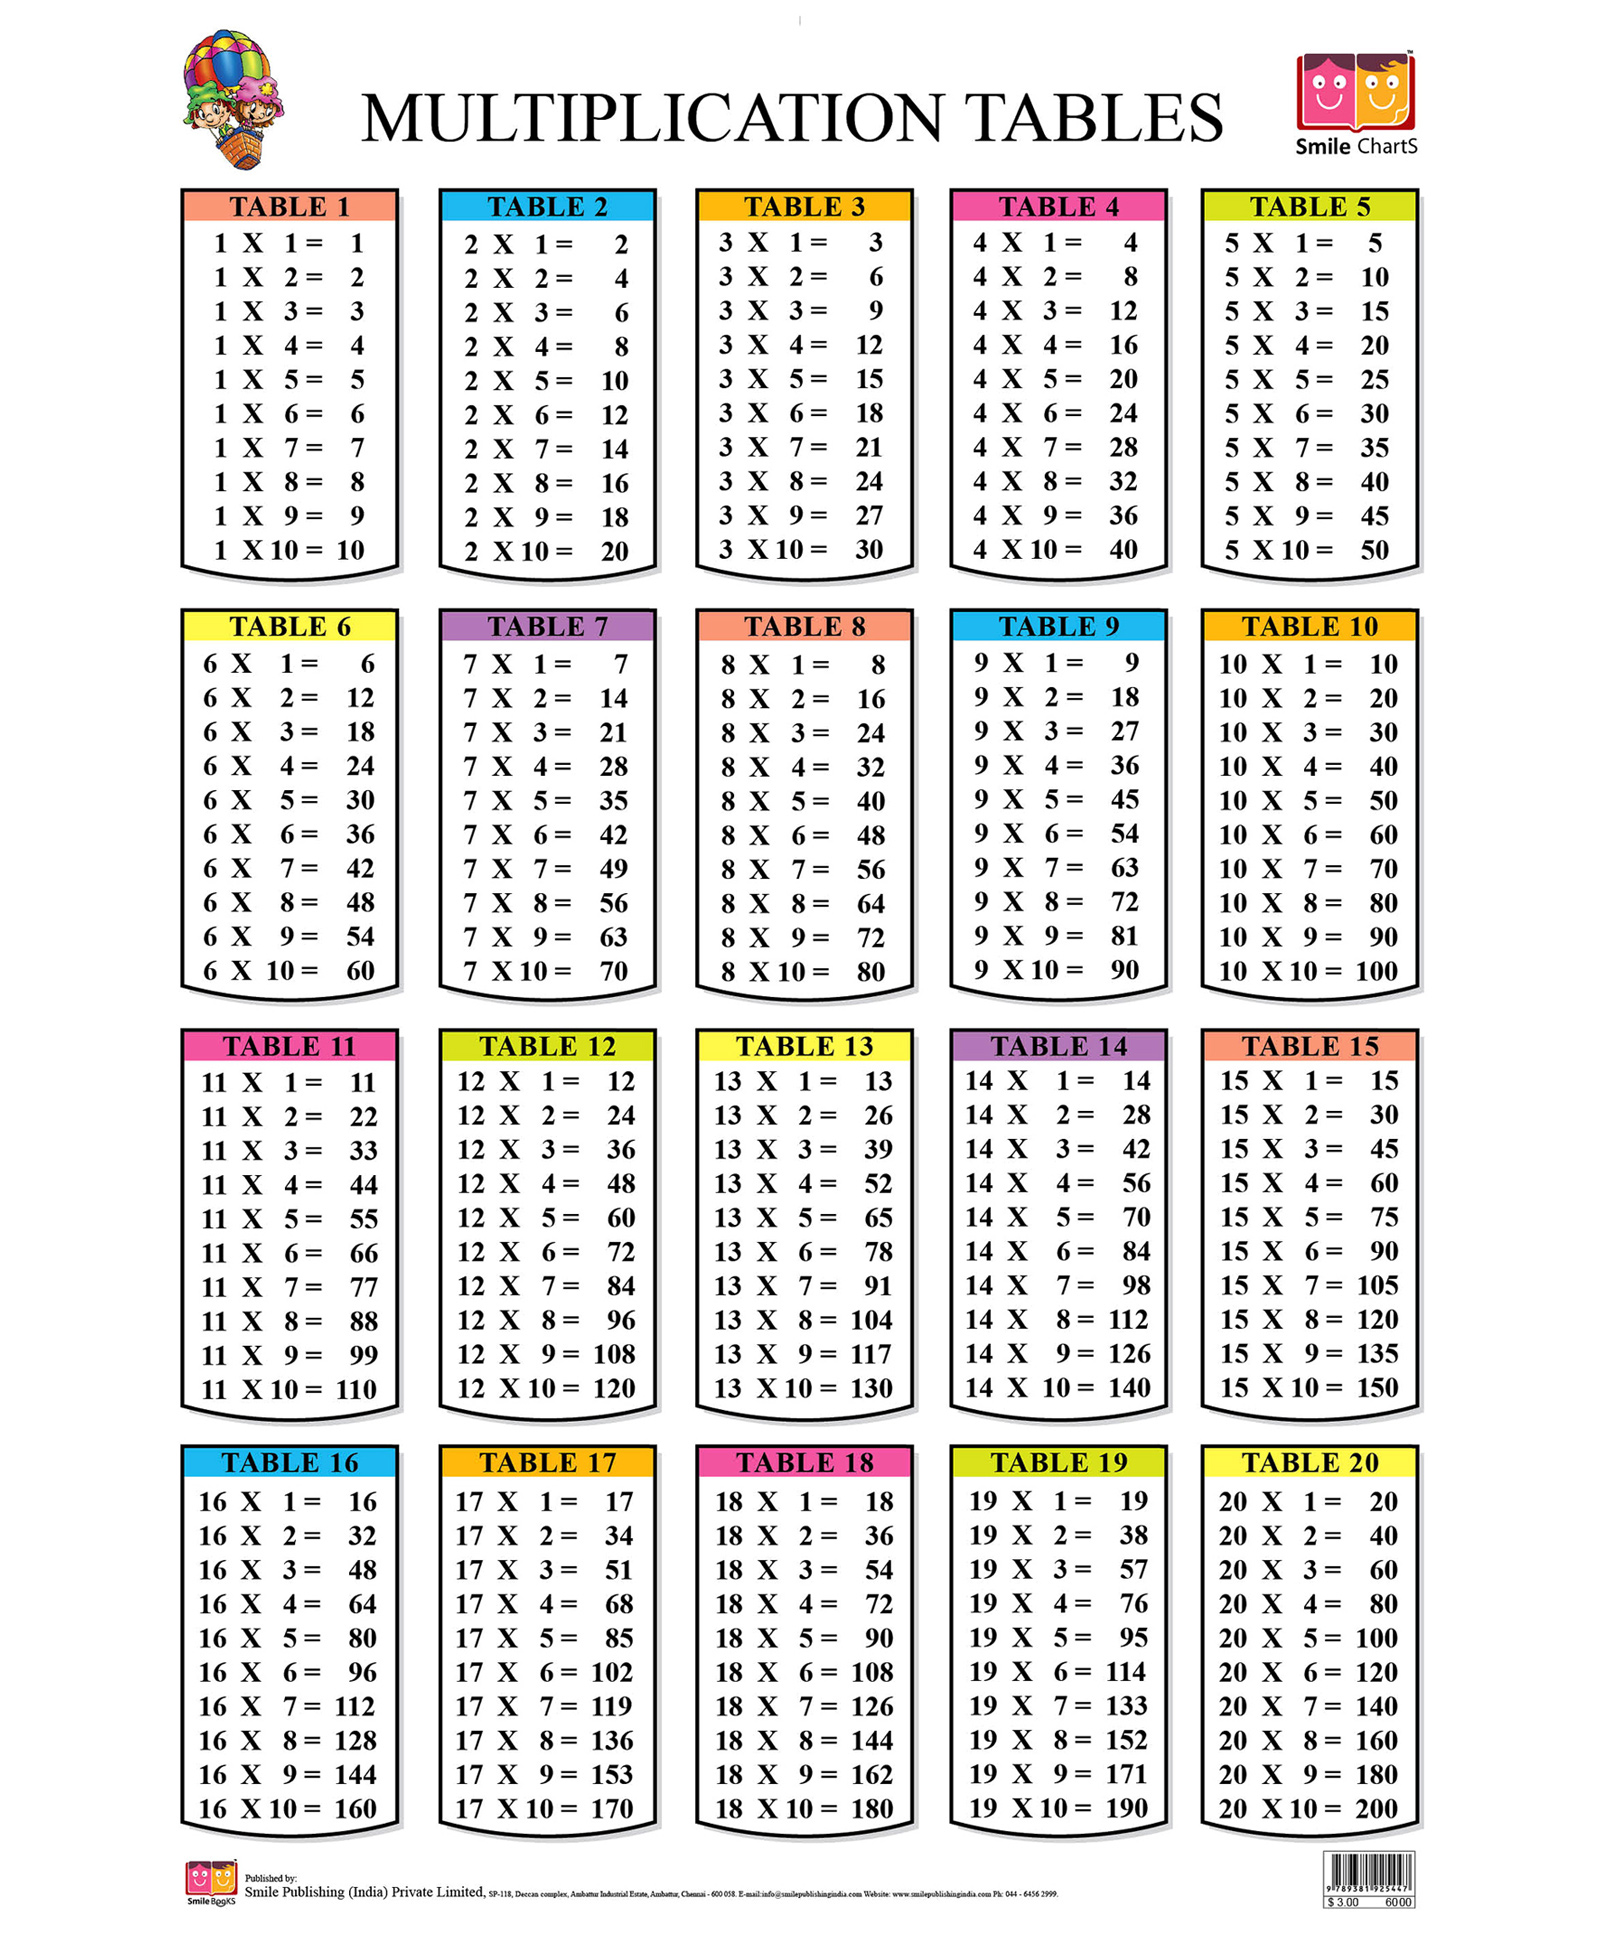 Multiplication tables from 1 to 20 for students